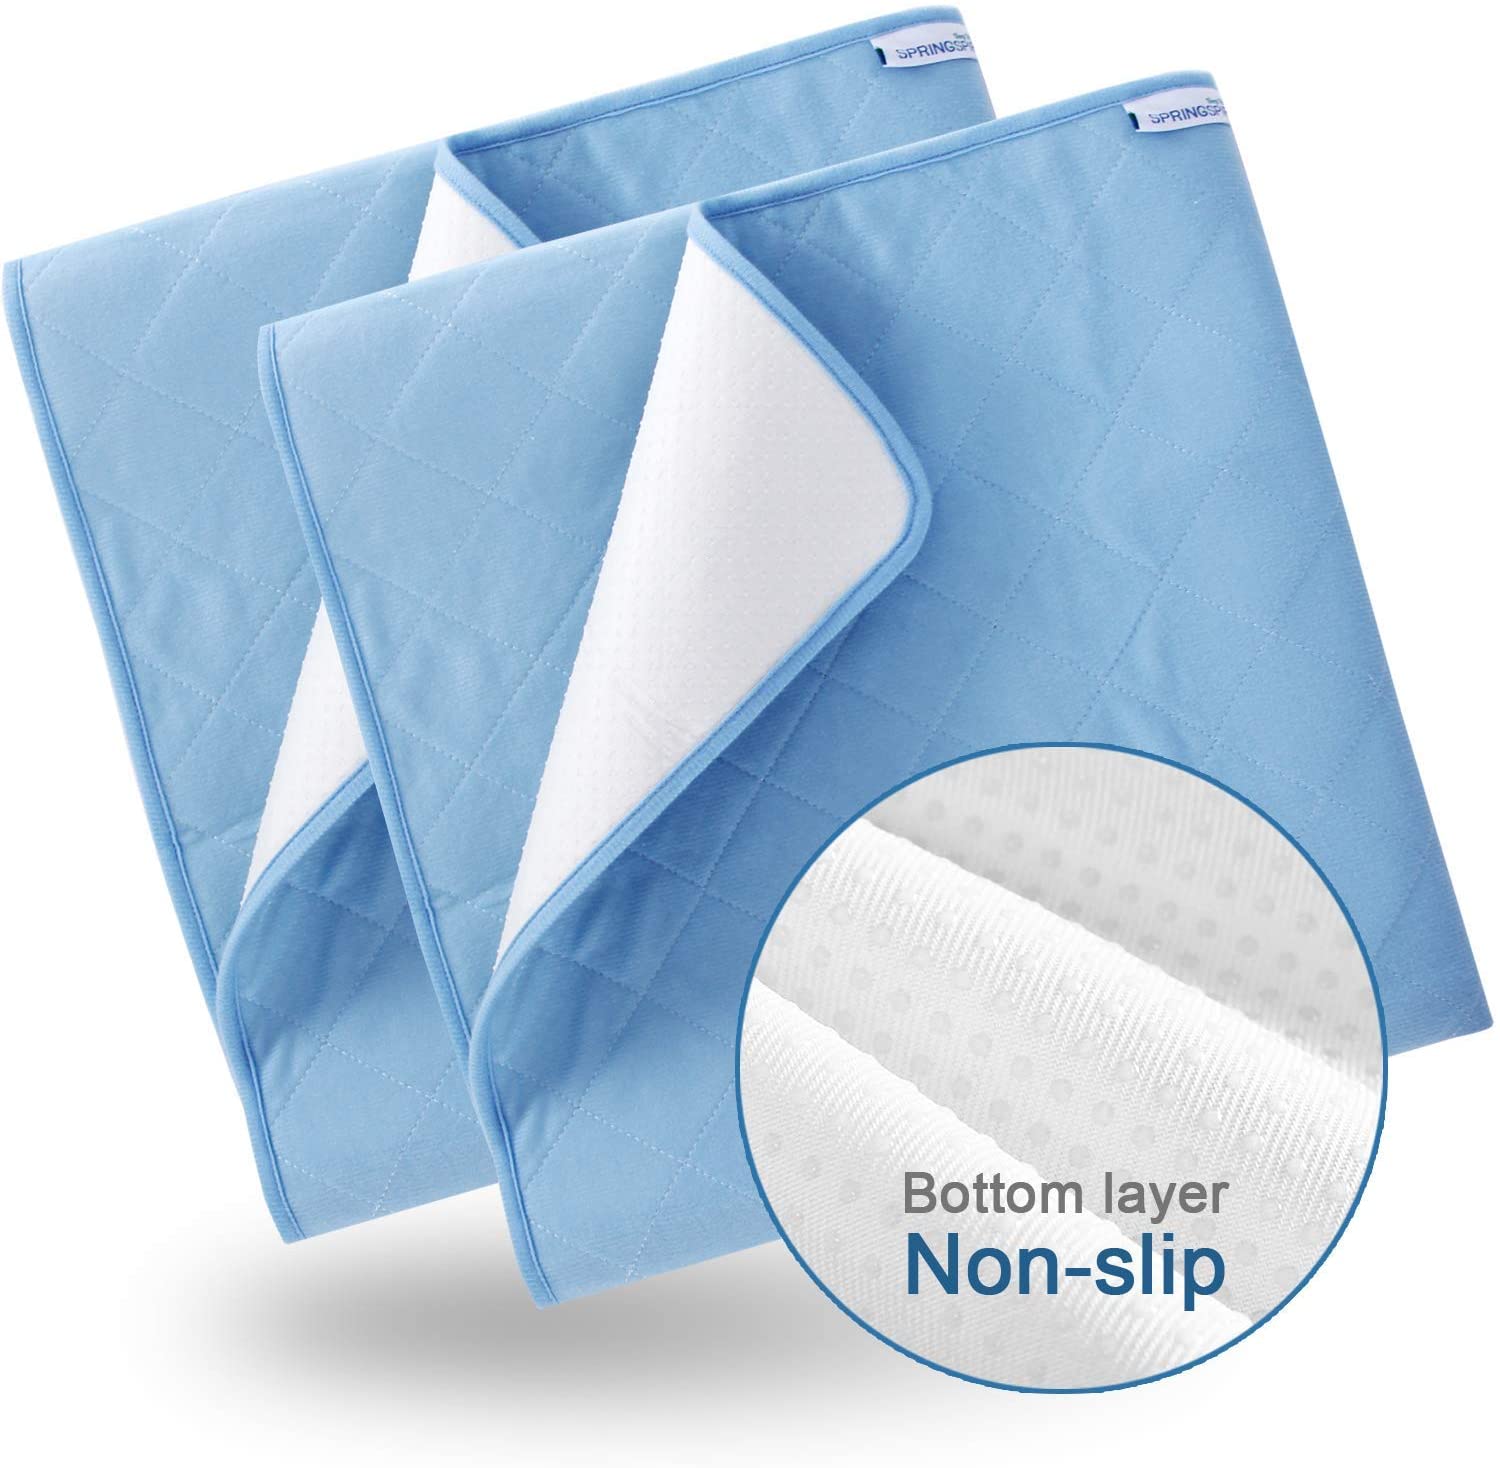 Washable Bed Pads for Incontinence 2 Pack Blue- 34'' x 52'', Reusable